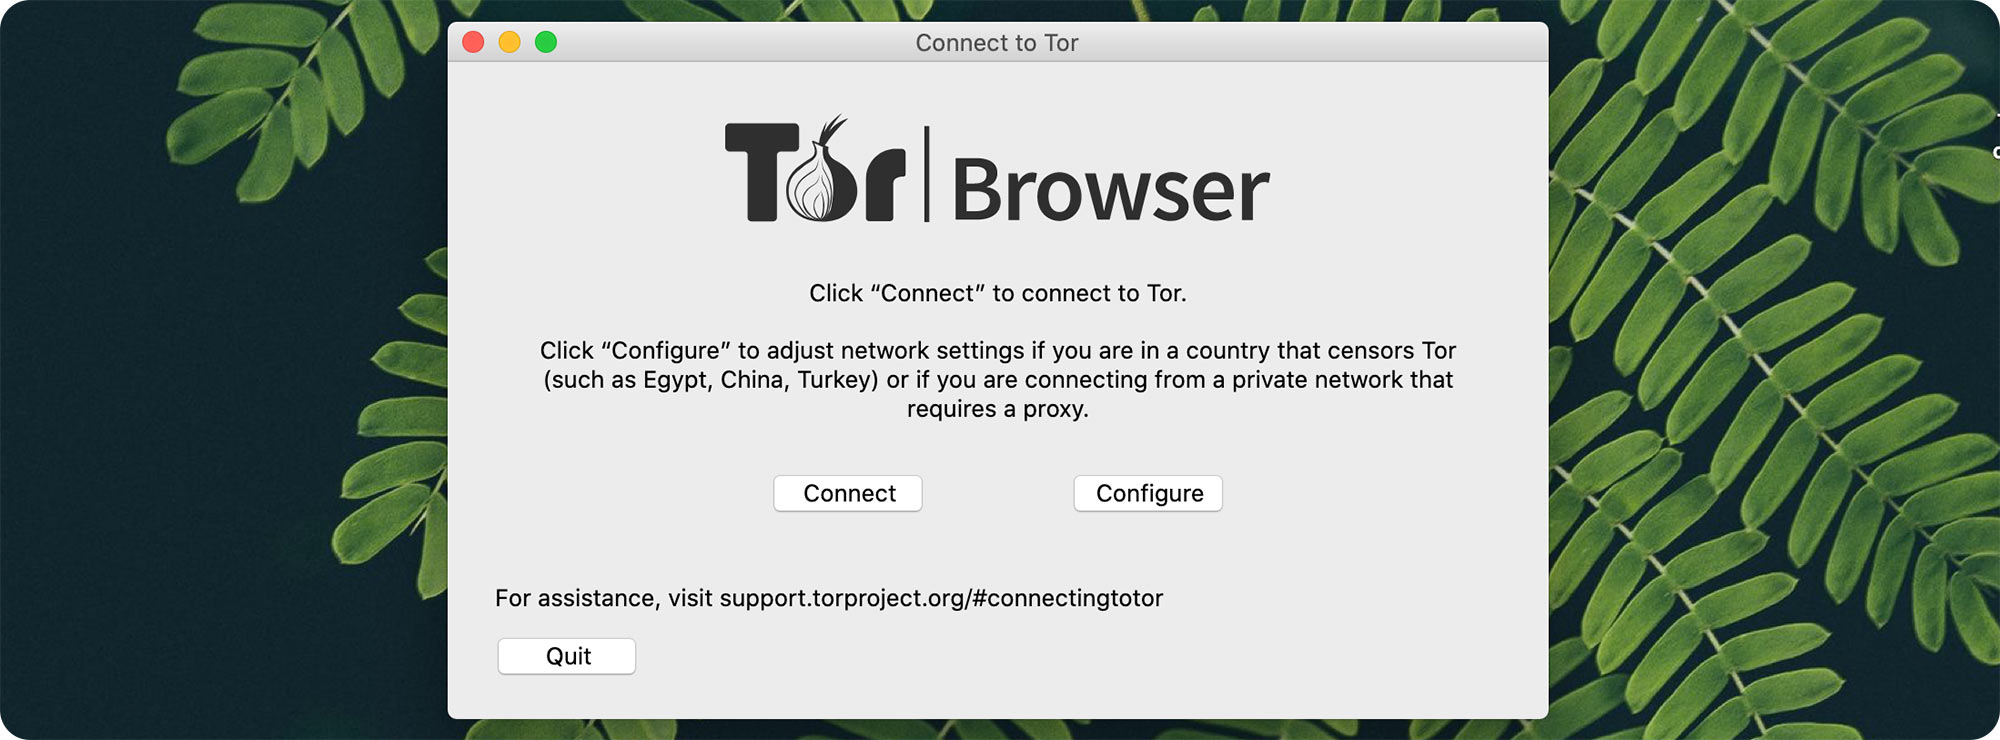 Tor browser mac os m1 install tor browser to kali linux